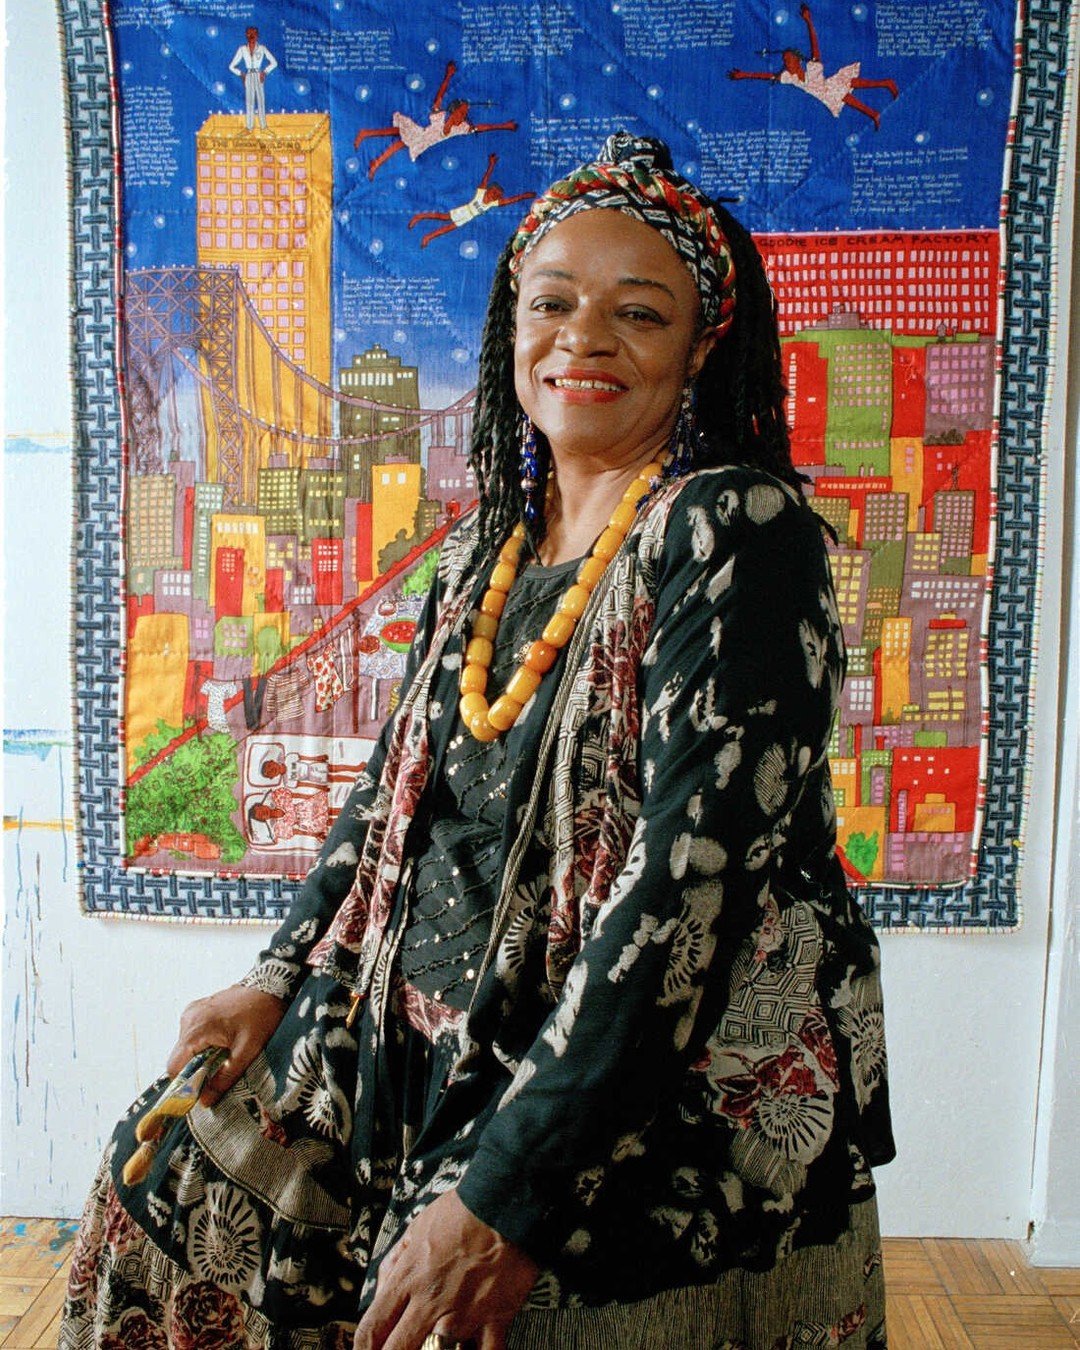 It is with a heavy heart that TIFF learns of the passing of Harlem-born artist, author, activist, and Englewood resident Faith Ringgold. 

Ringgold painted some of the most truthful and empowering representations of African Americans during the civil